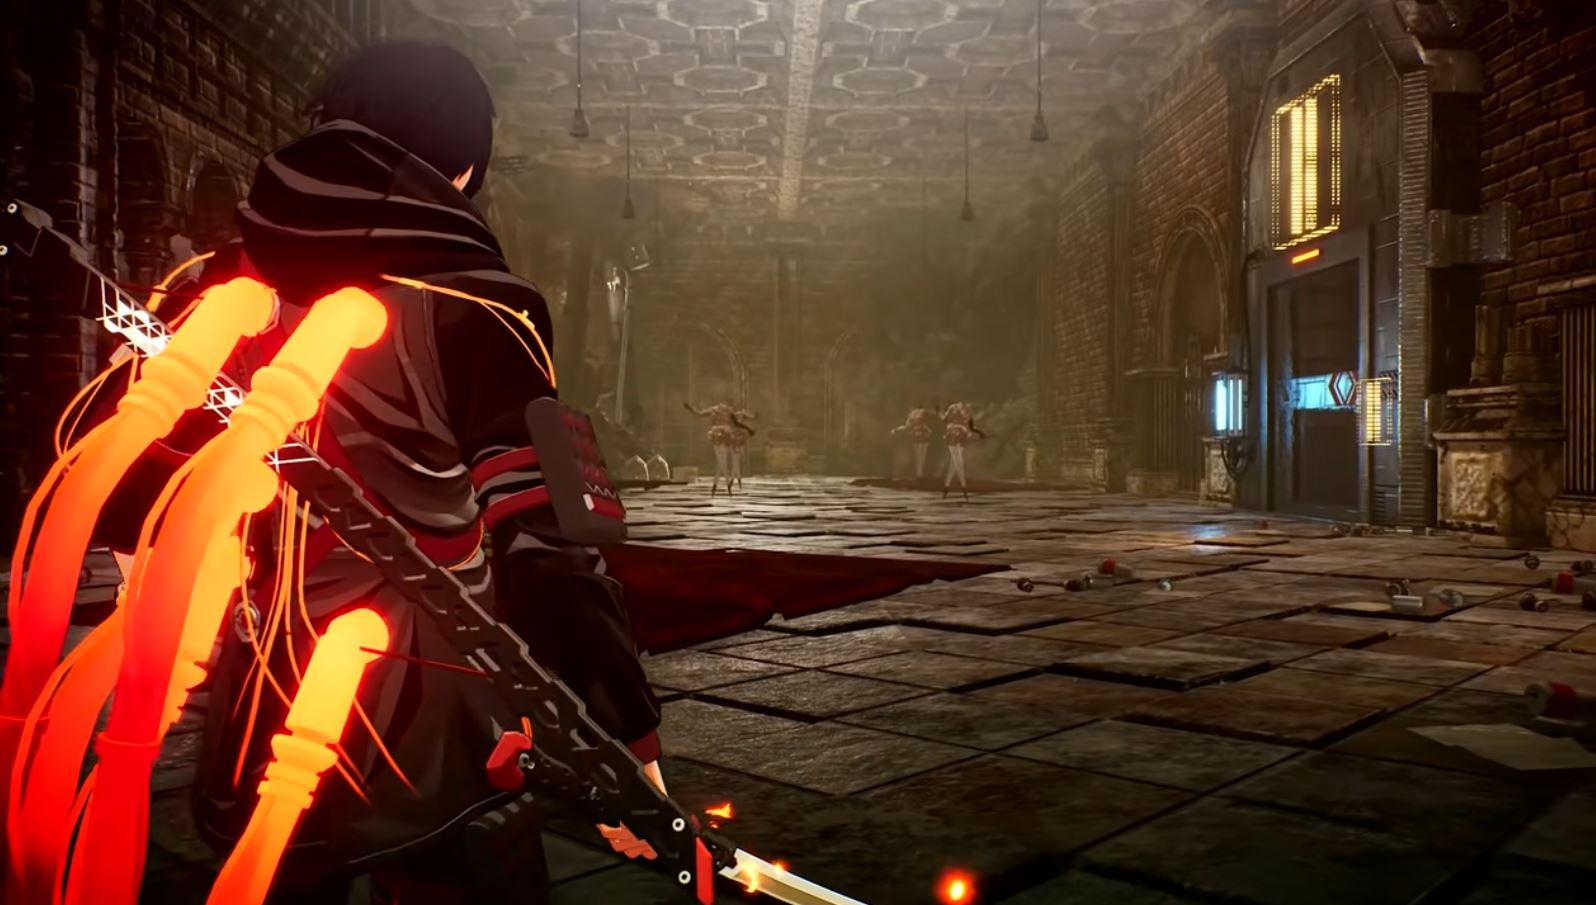 Scarlet Nexus Video Game Review. A fusion of JRPG, hack and slash